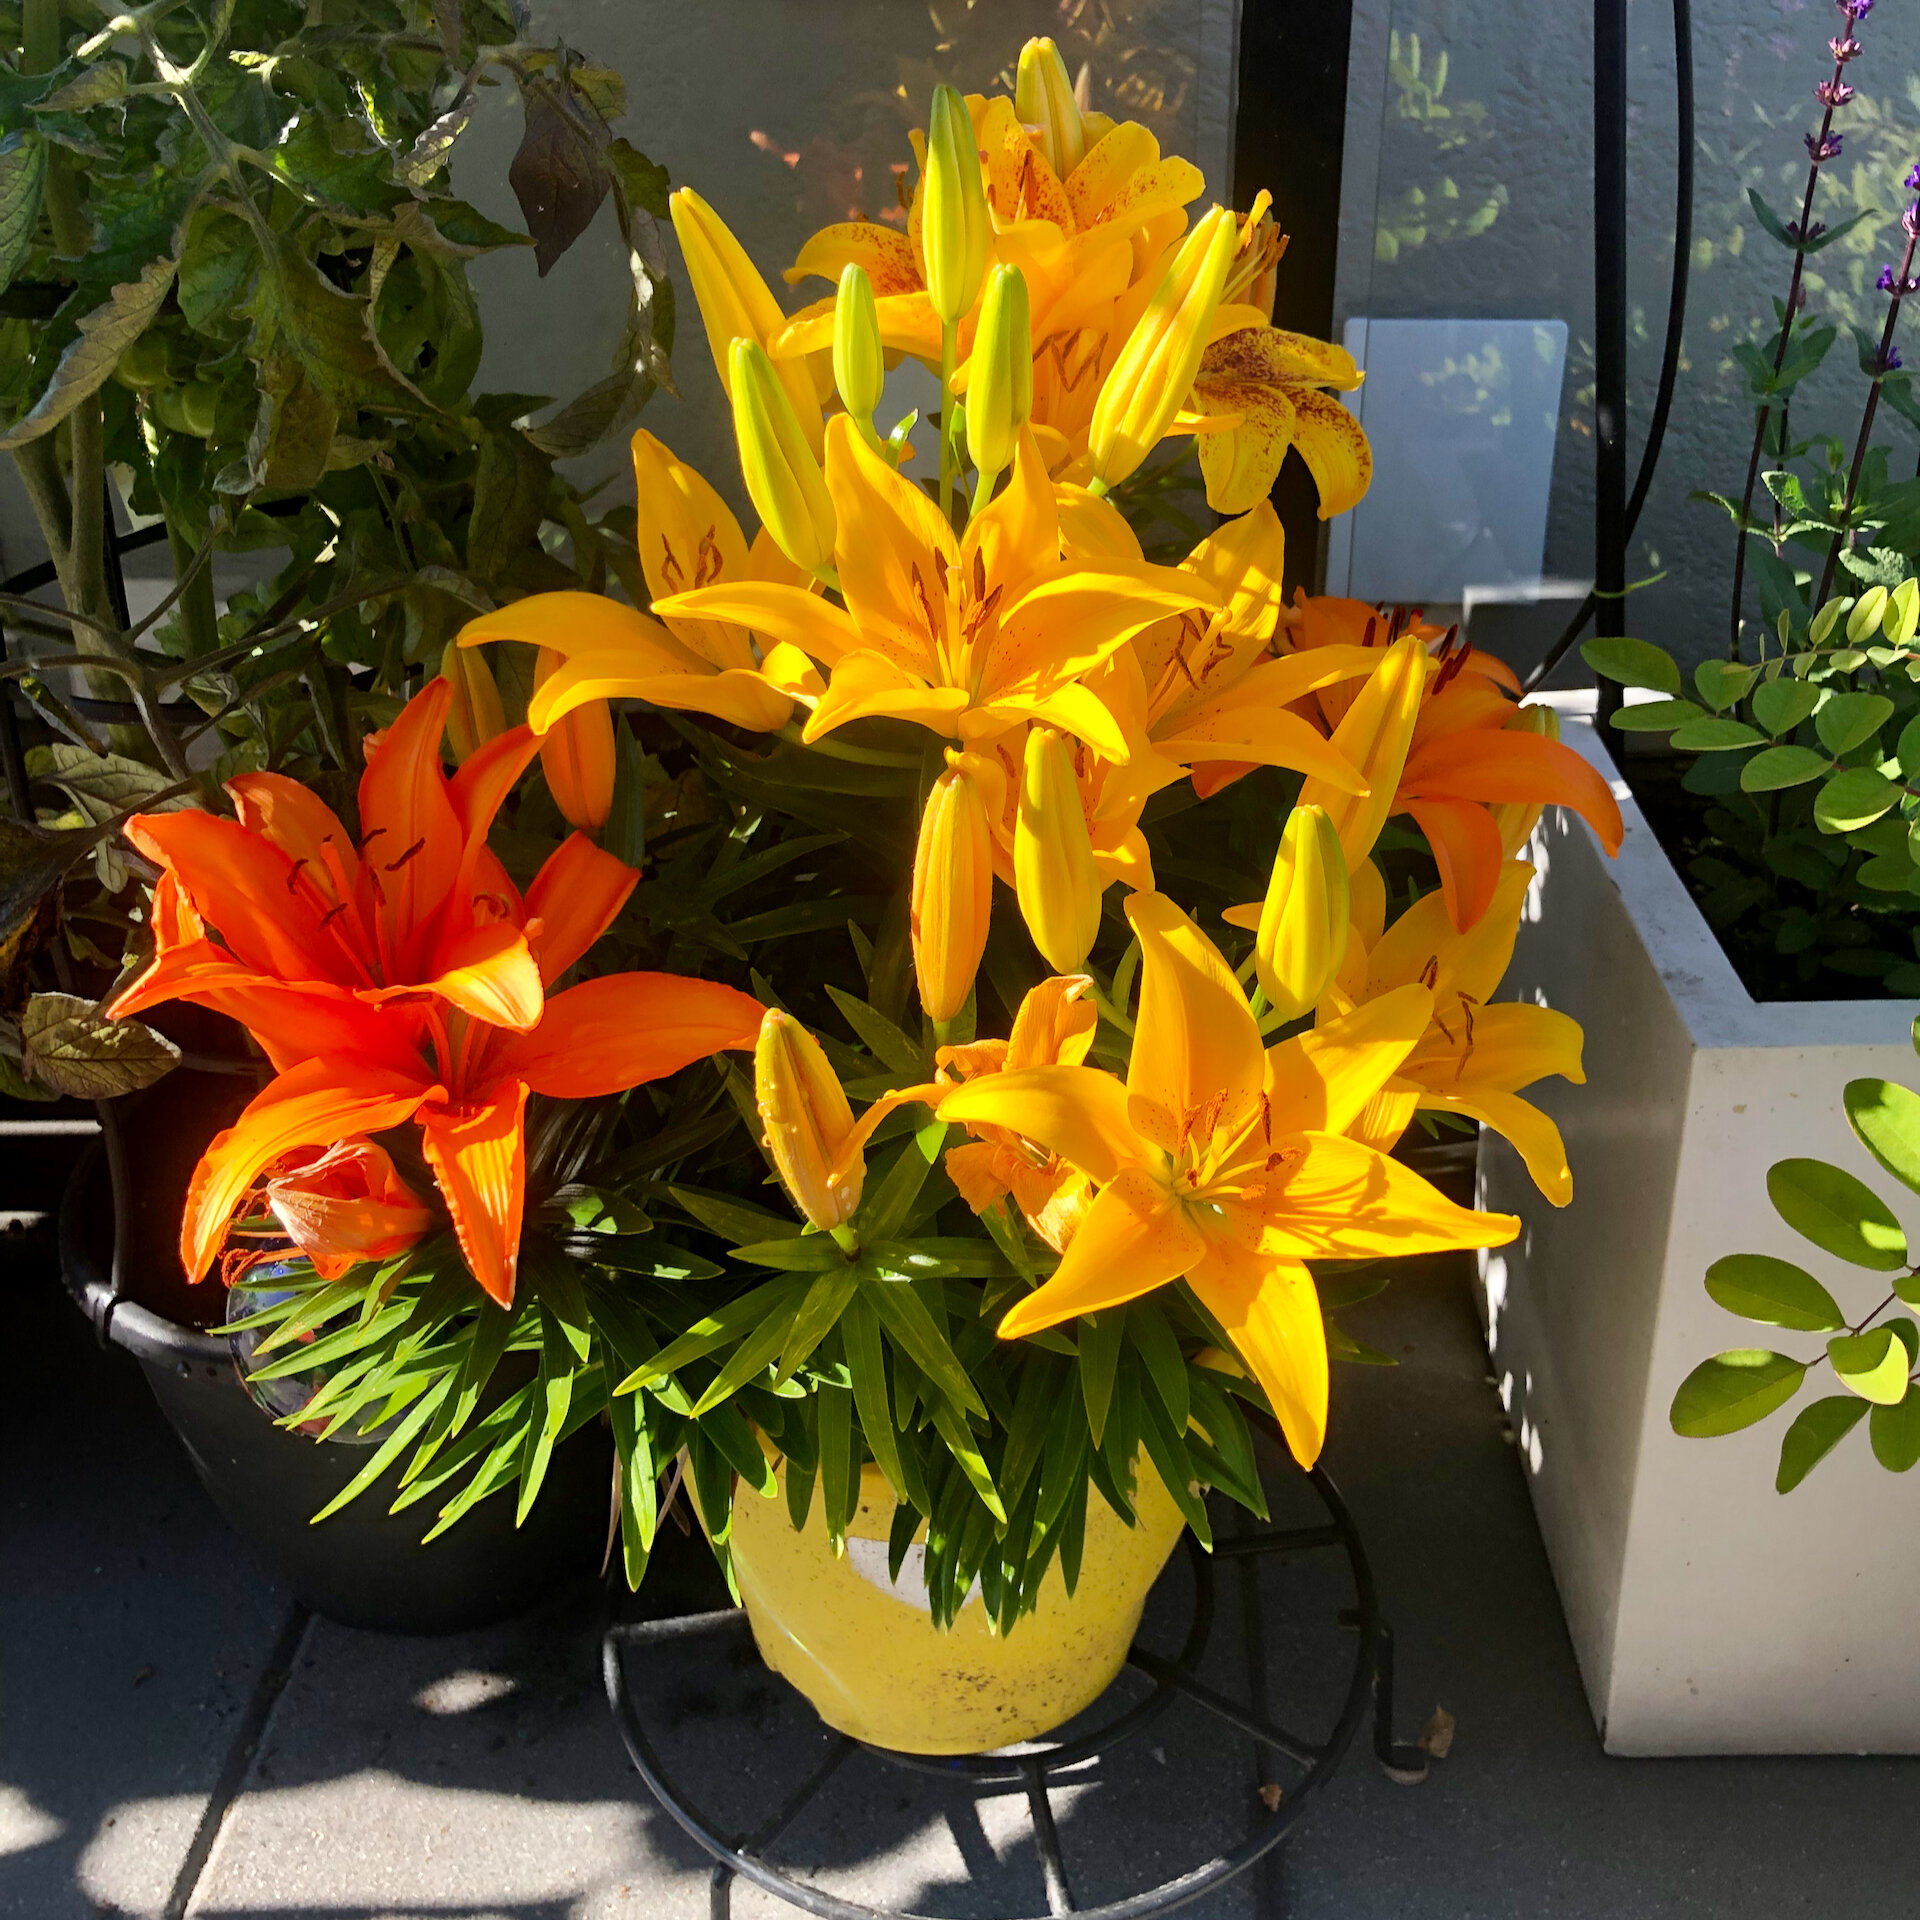  Our lilies are almost at the end, but are also doing well. We bought these last year, they were OK, but came back with a vengeance this year! 